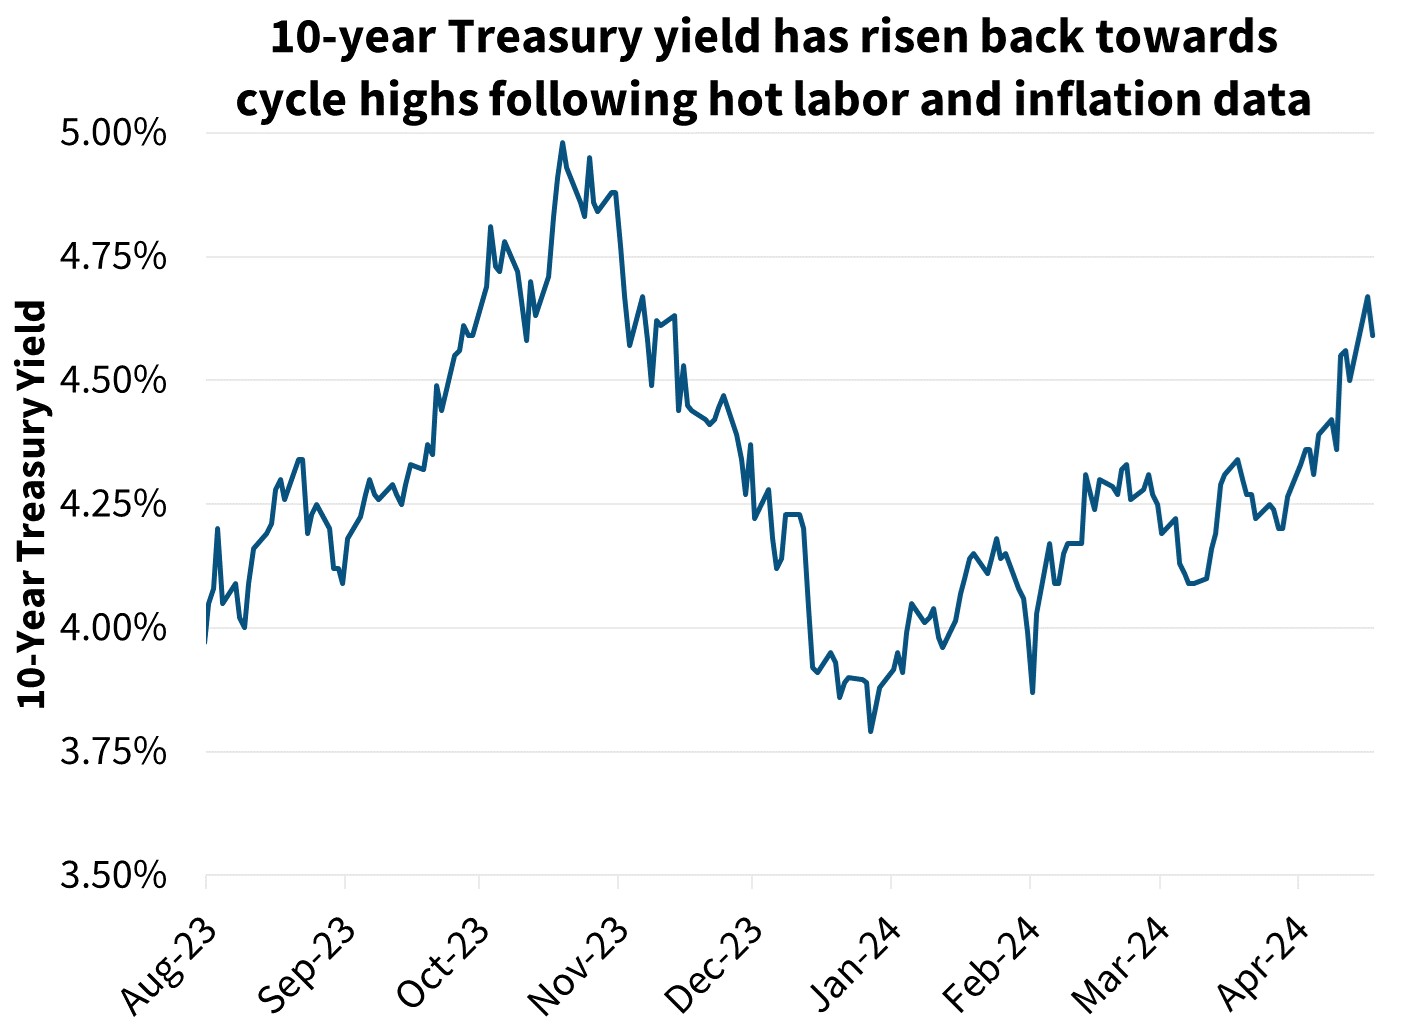 10-year Treasury yield has risen back towards cycle highs following hot labor and inflation data